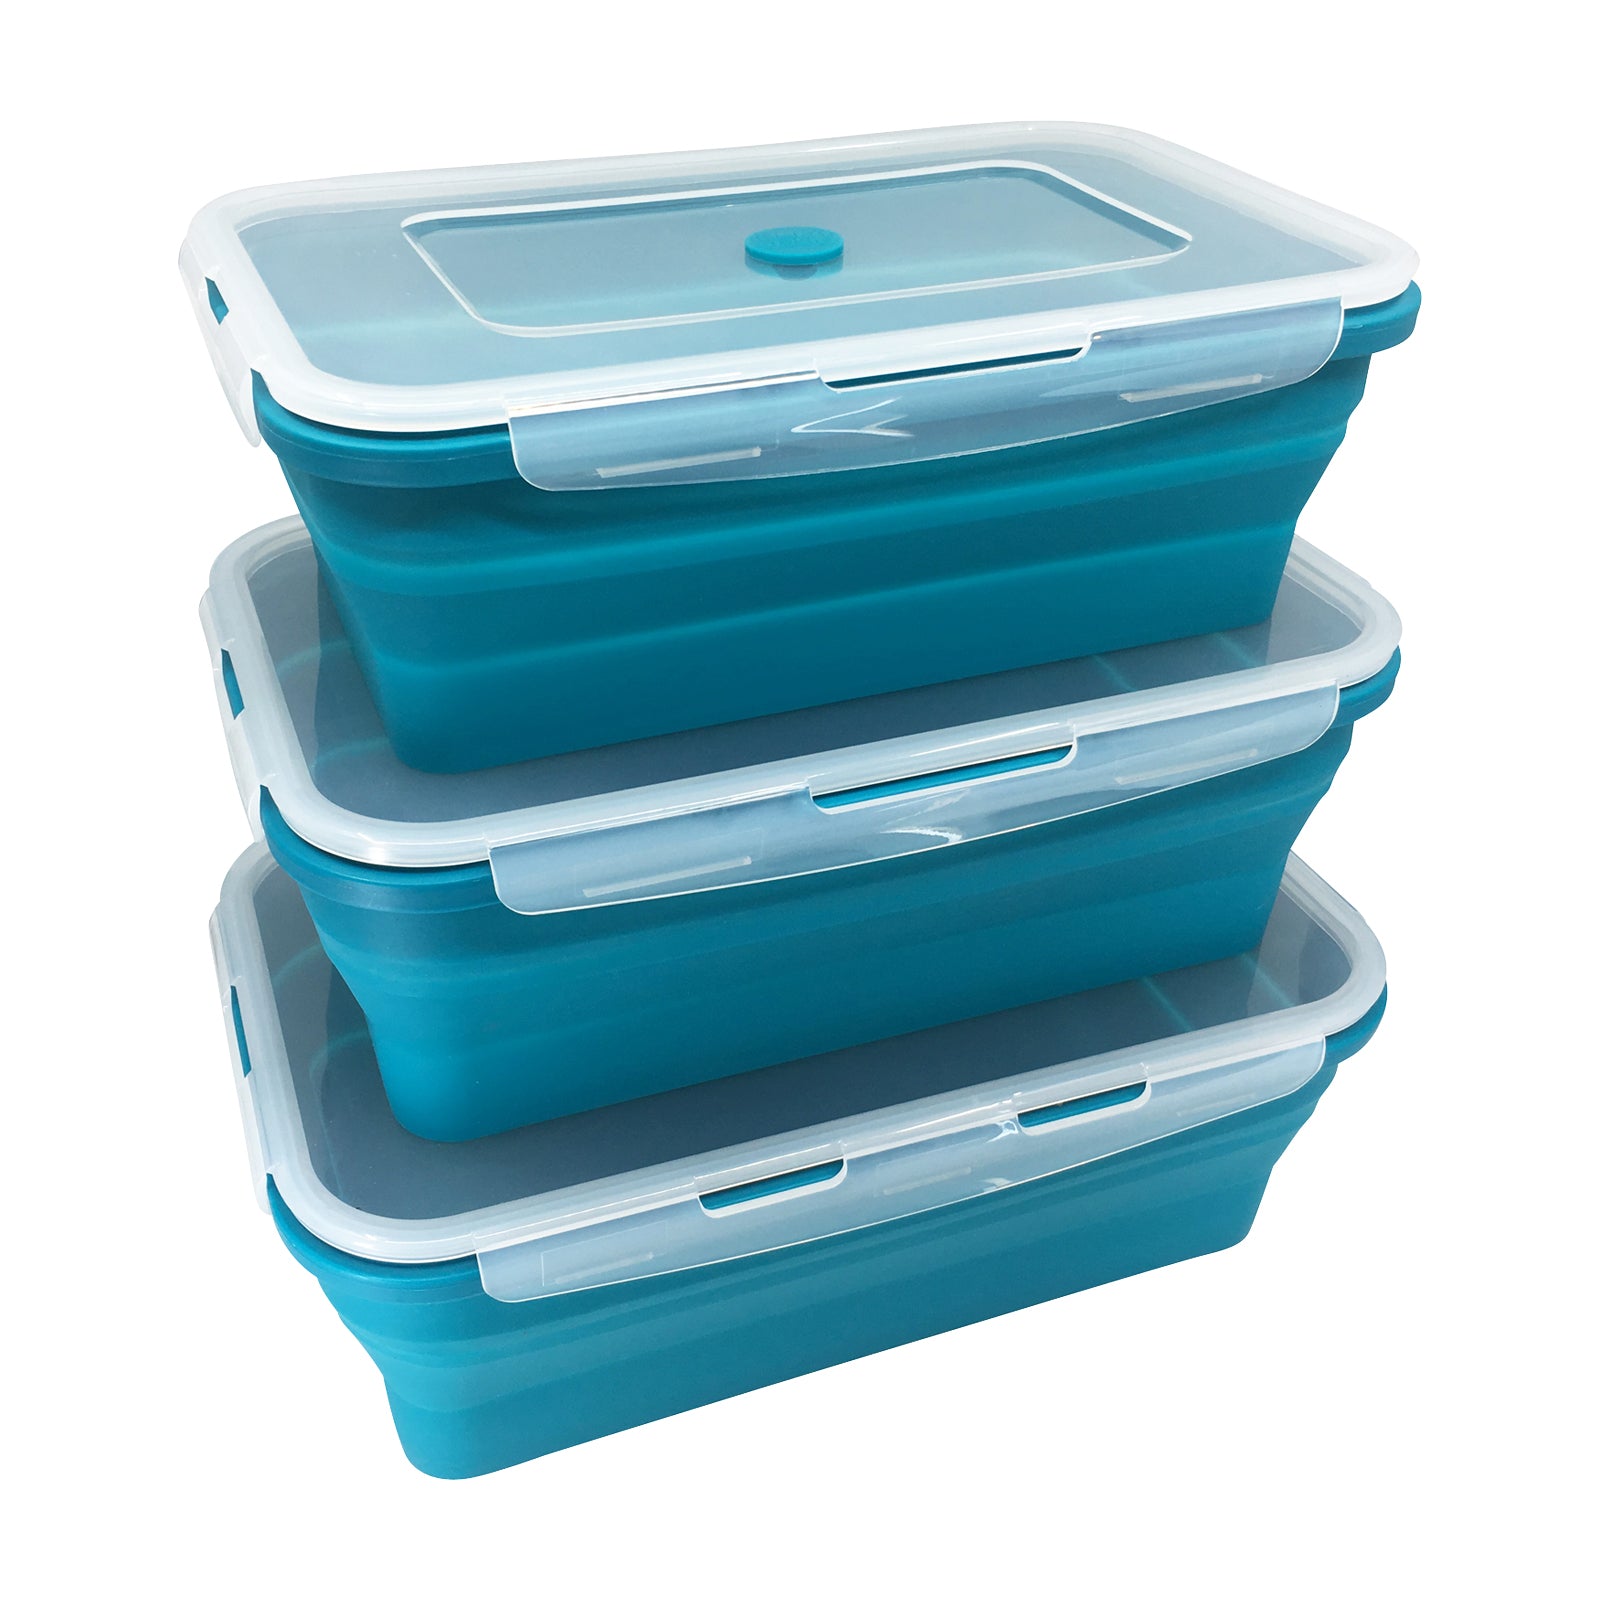 Buy Flat Stacks Collapsible Silicone Food Storage Containers - Flat ...